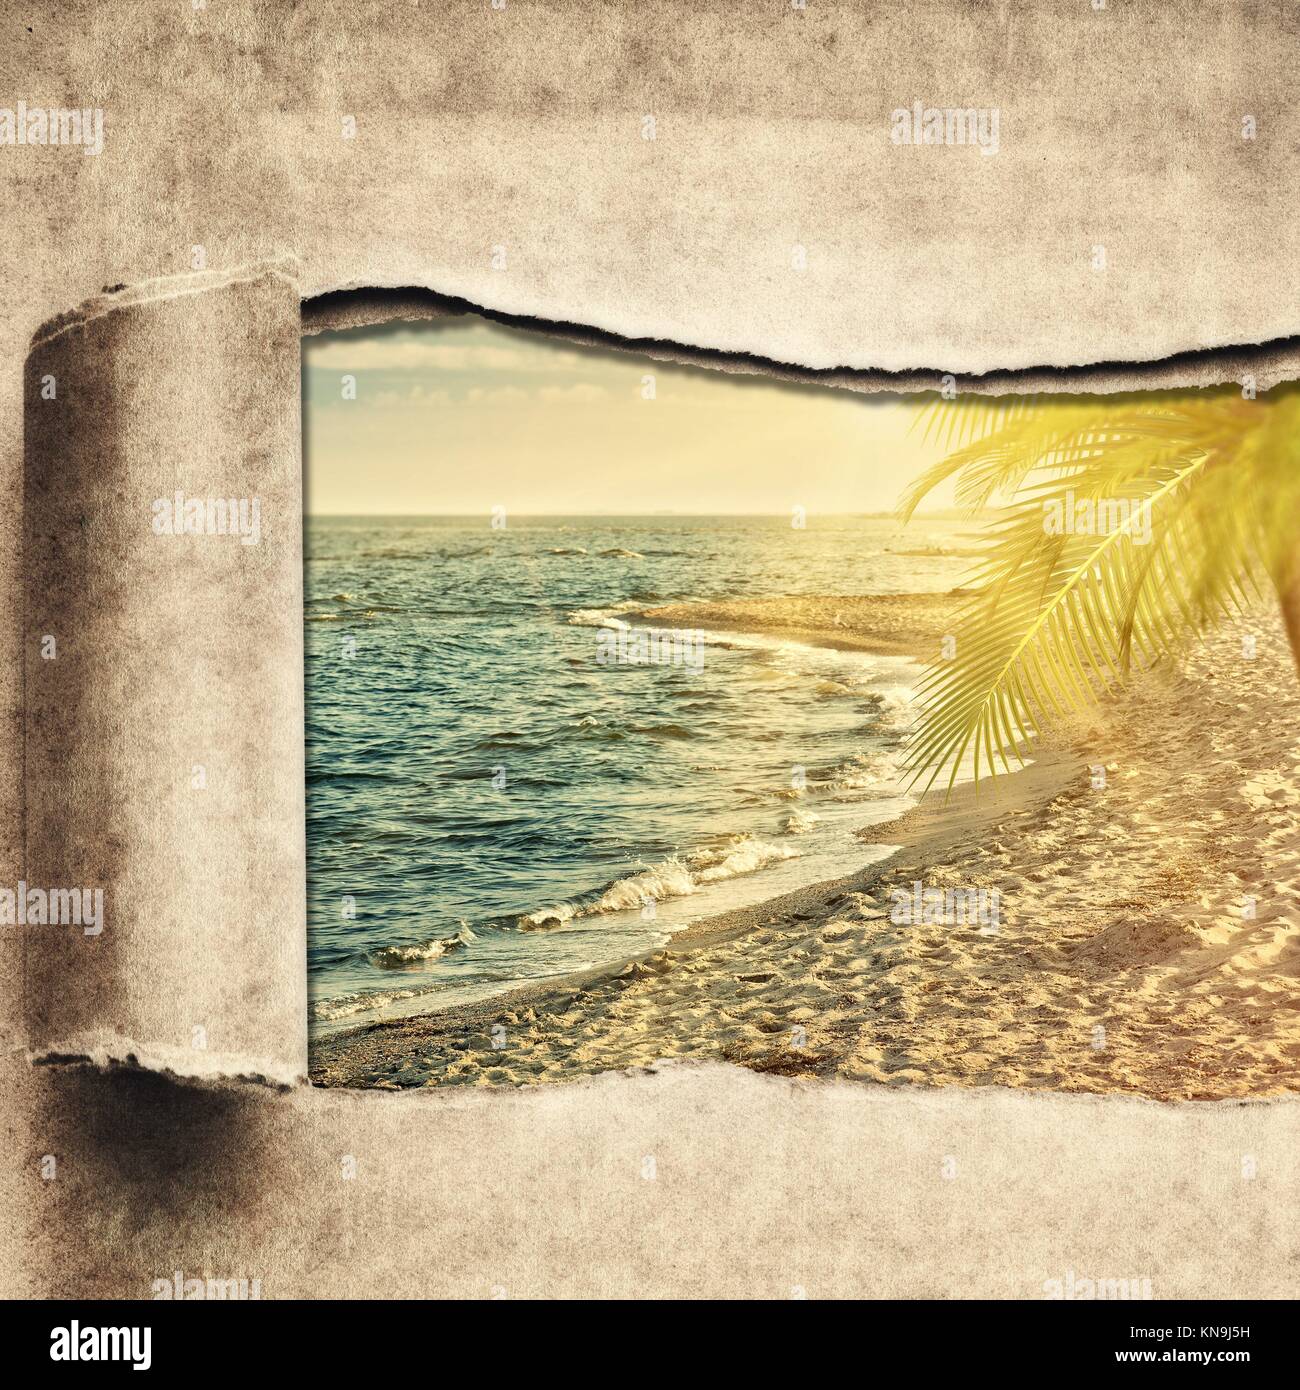 Travel and adventure backgrounds with vintage map and beautiful places. Stock Photo